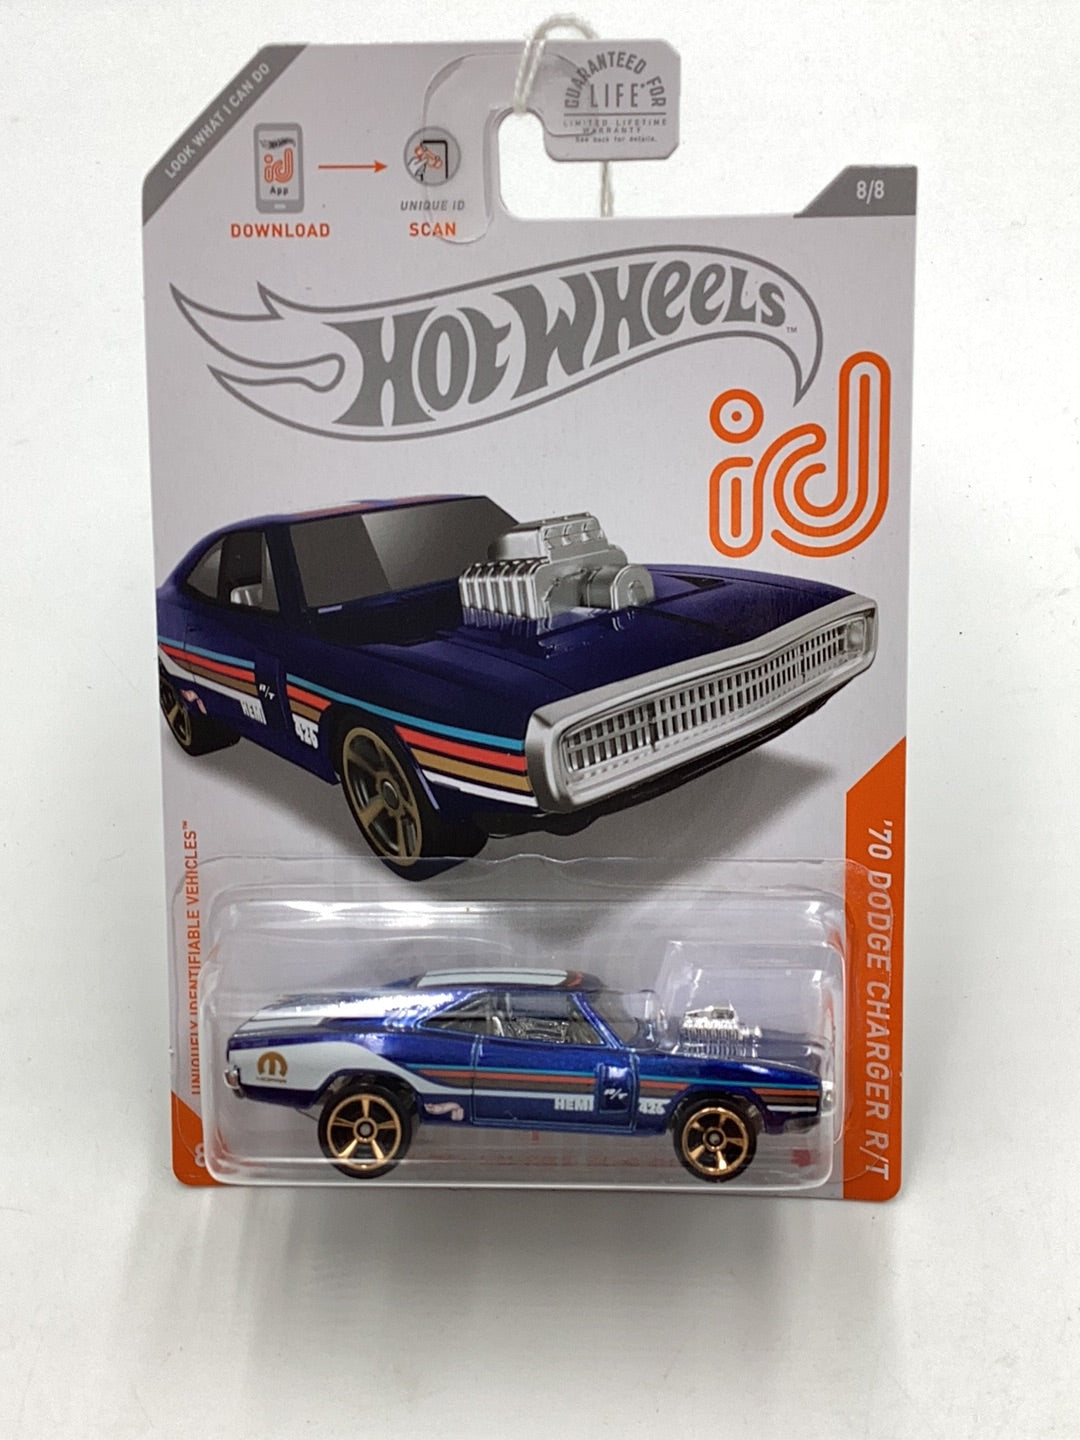 Hot Wheels ID #8 70 Dodge Charger R/T chase  8/8 160B